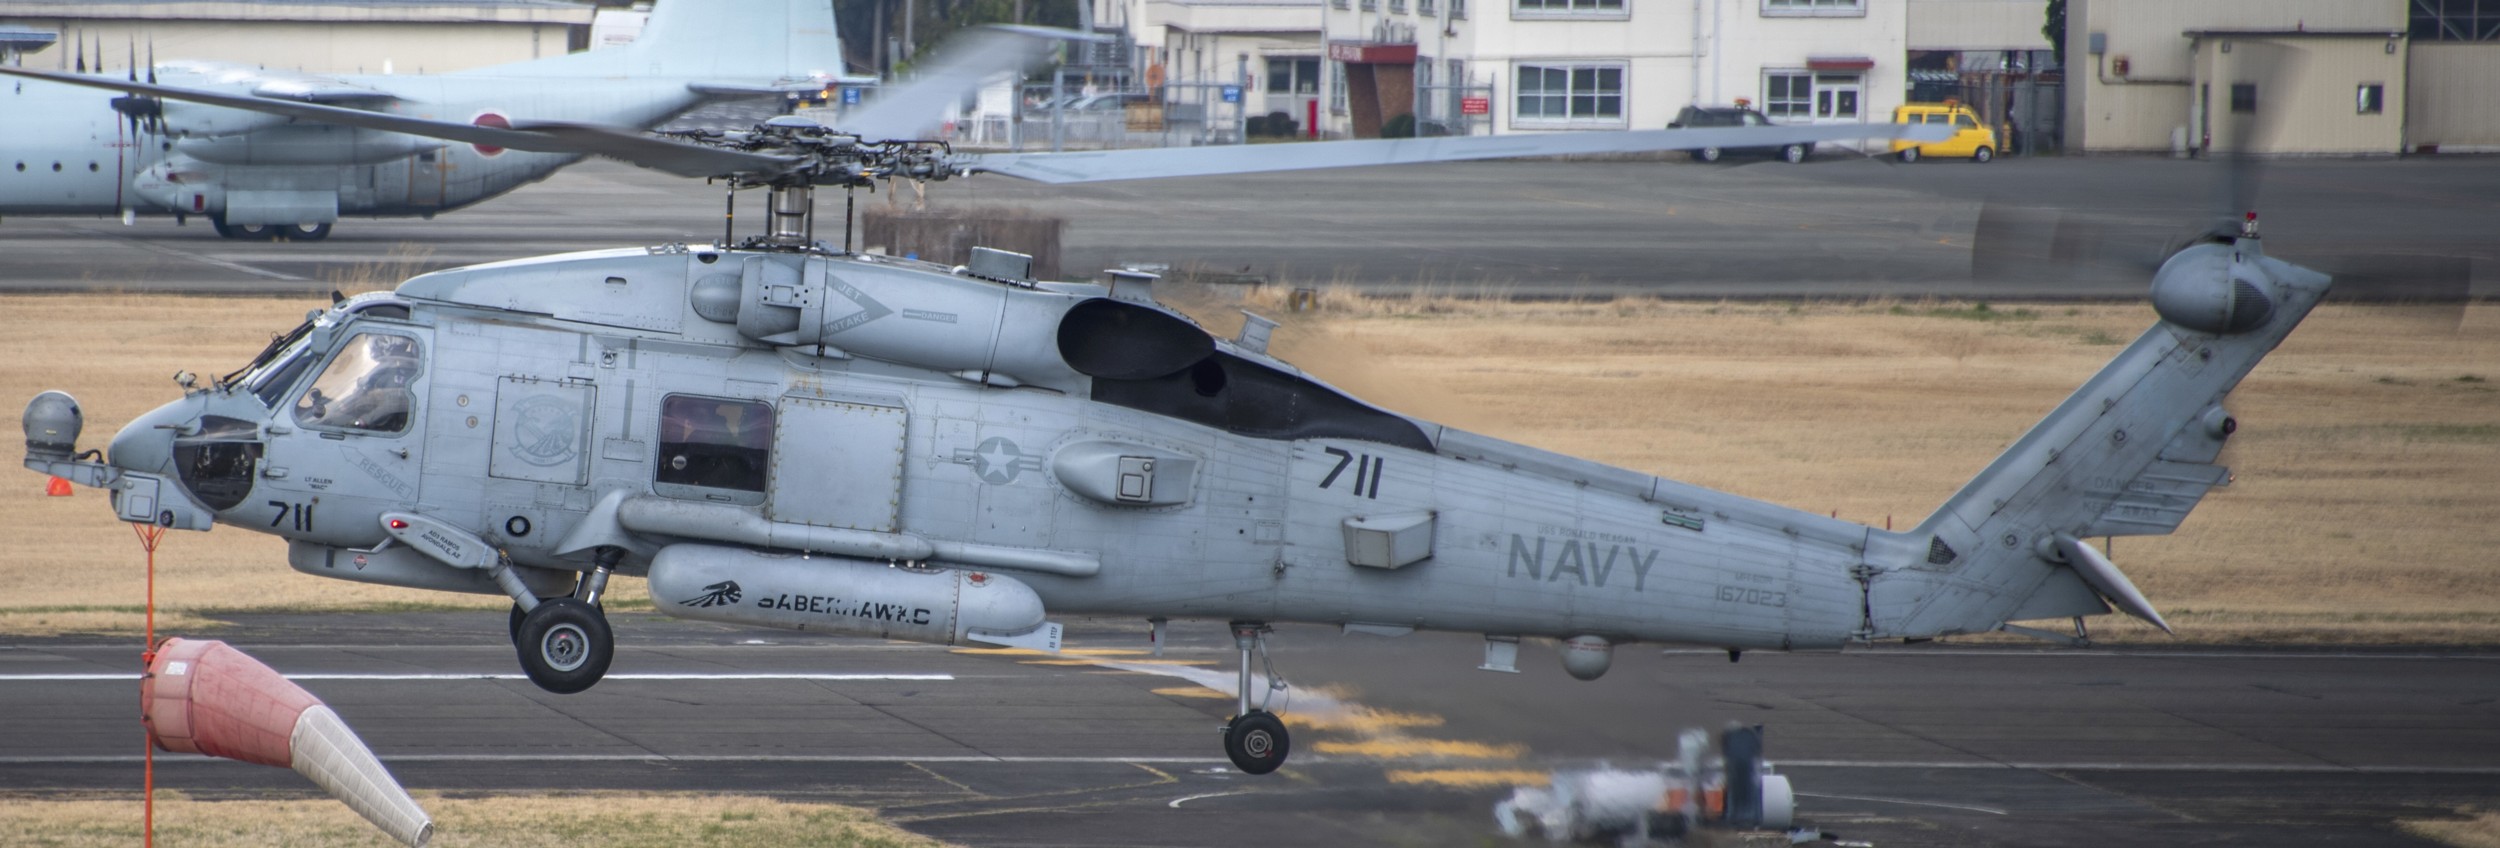 hsm-77 saberhawks helicopter maritime strike squadron mh-60r seahawk us navy 2013 26